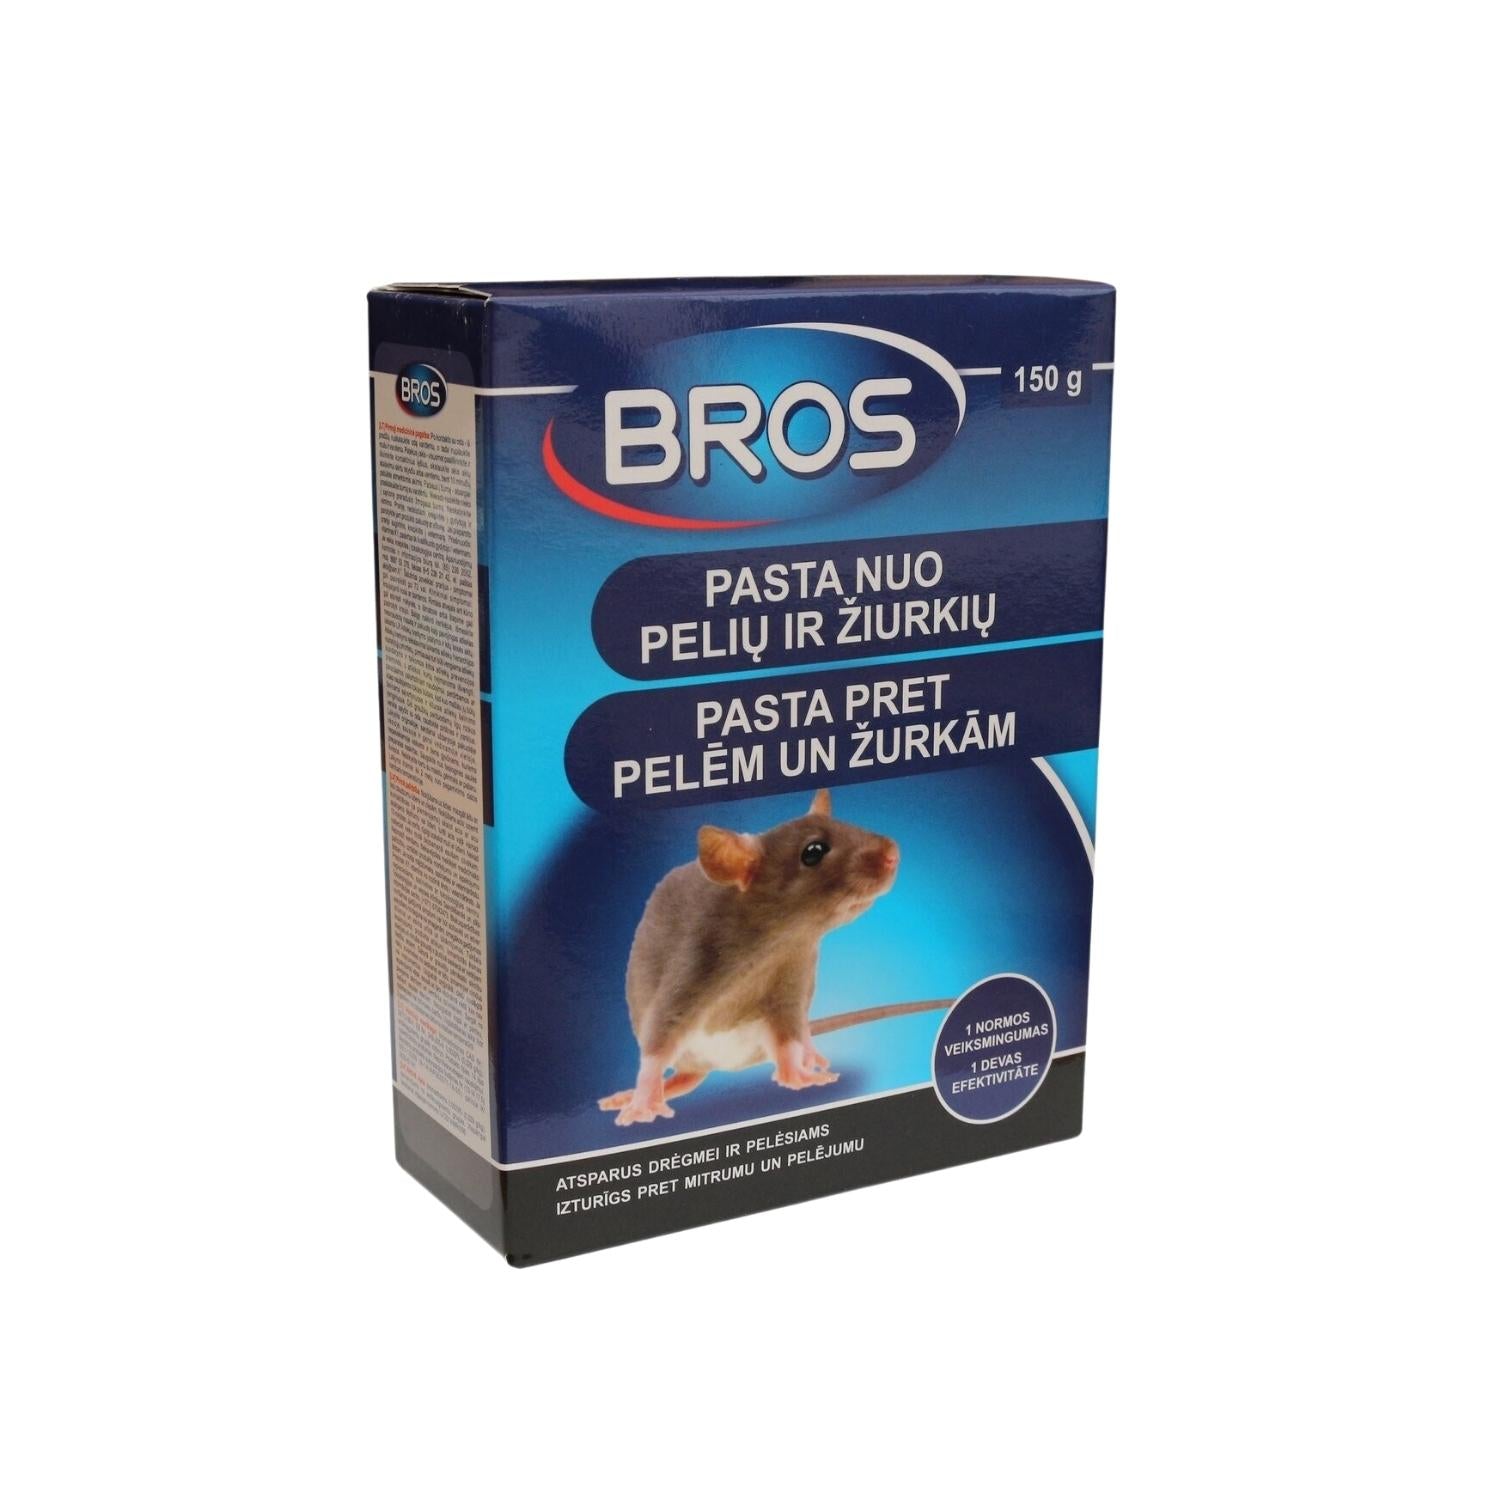 Mice and rat poison (Bros paste 150g)